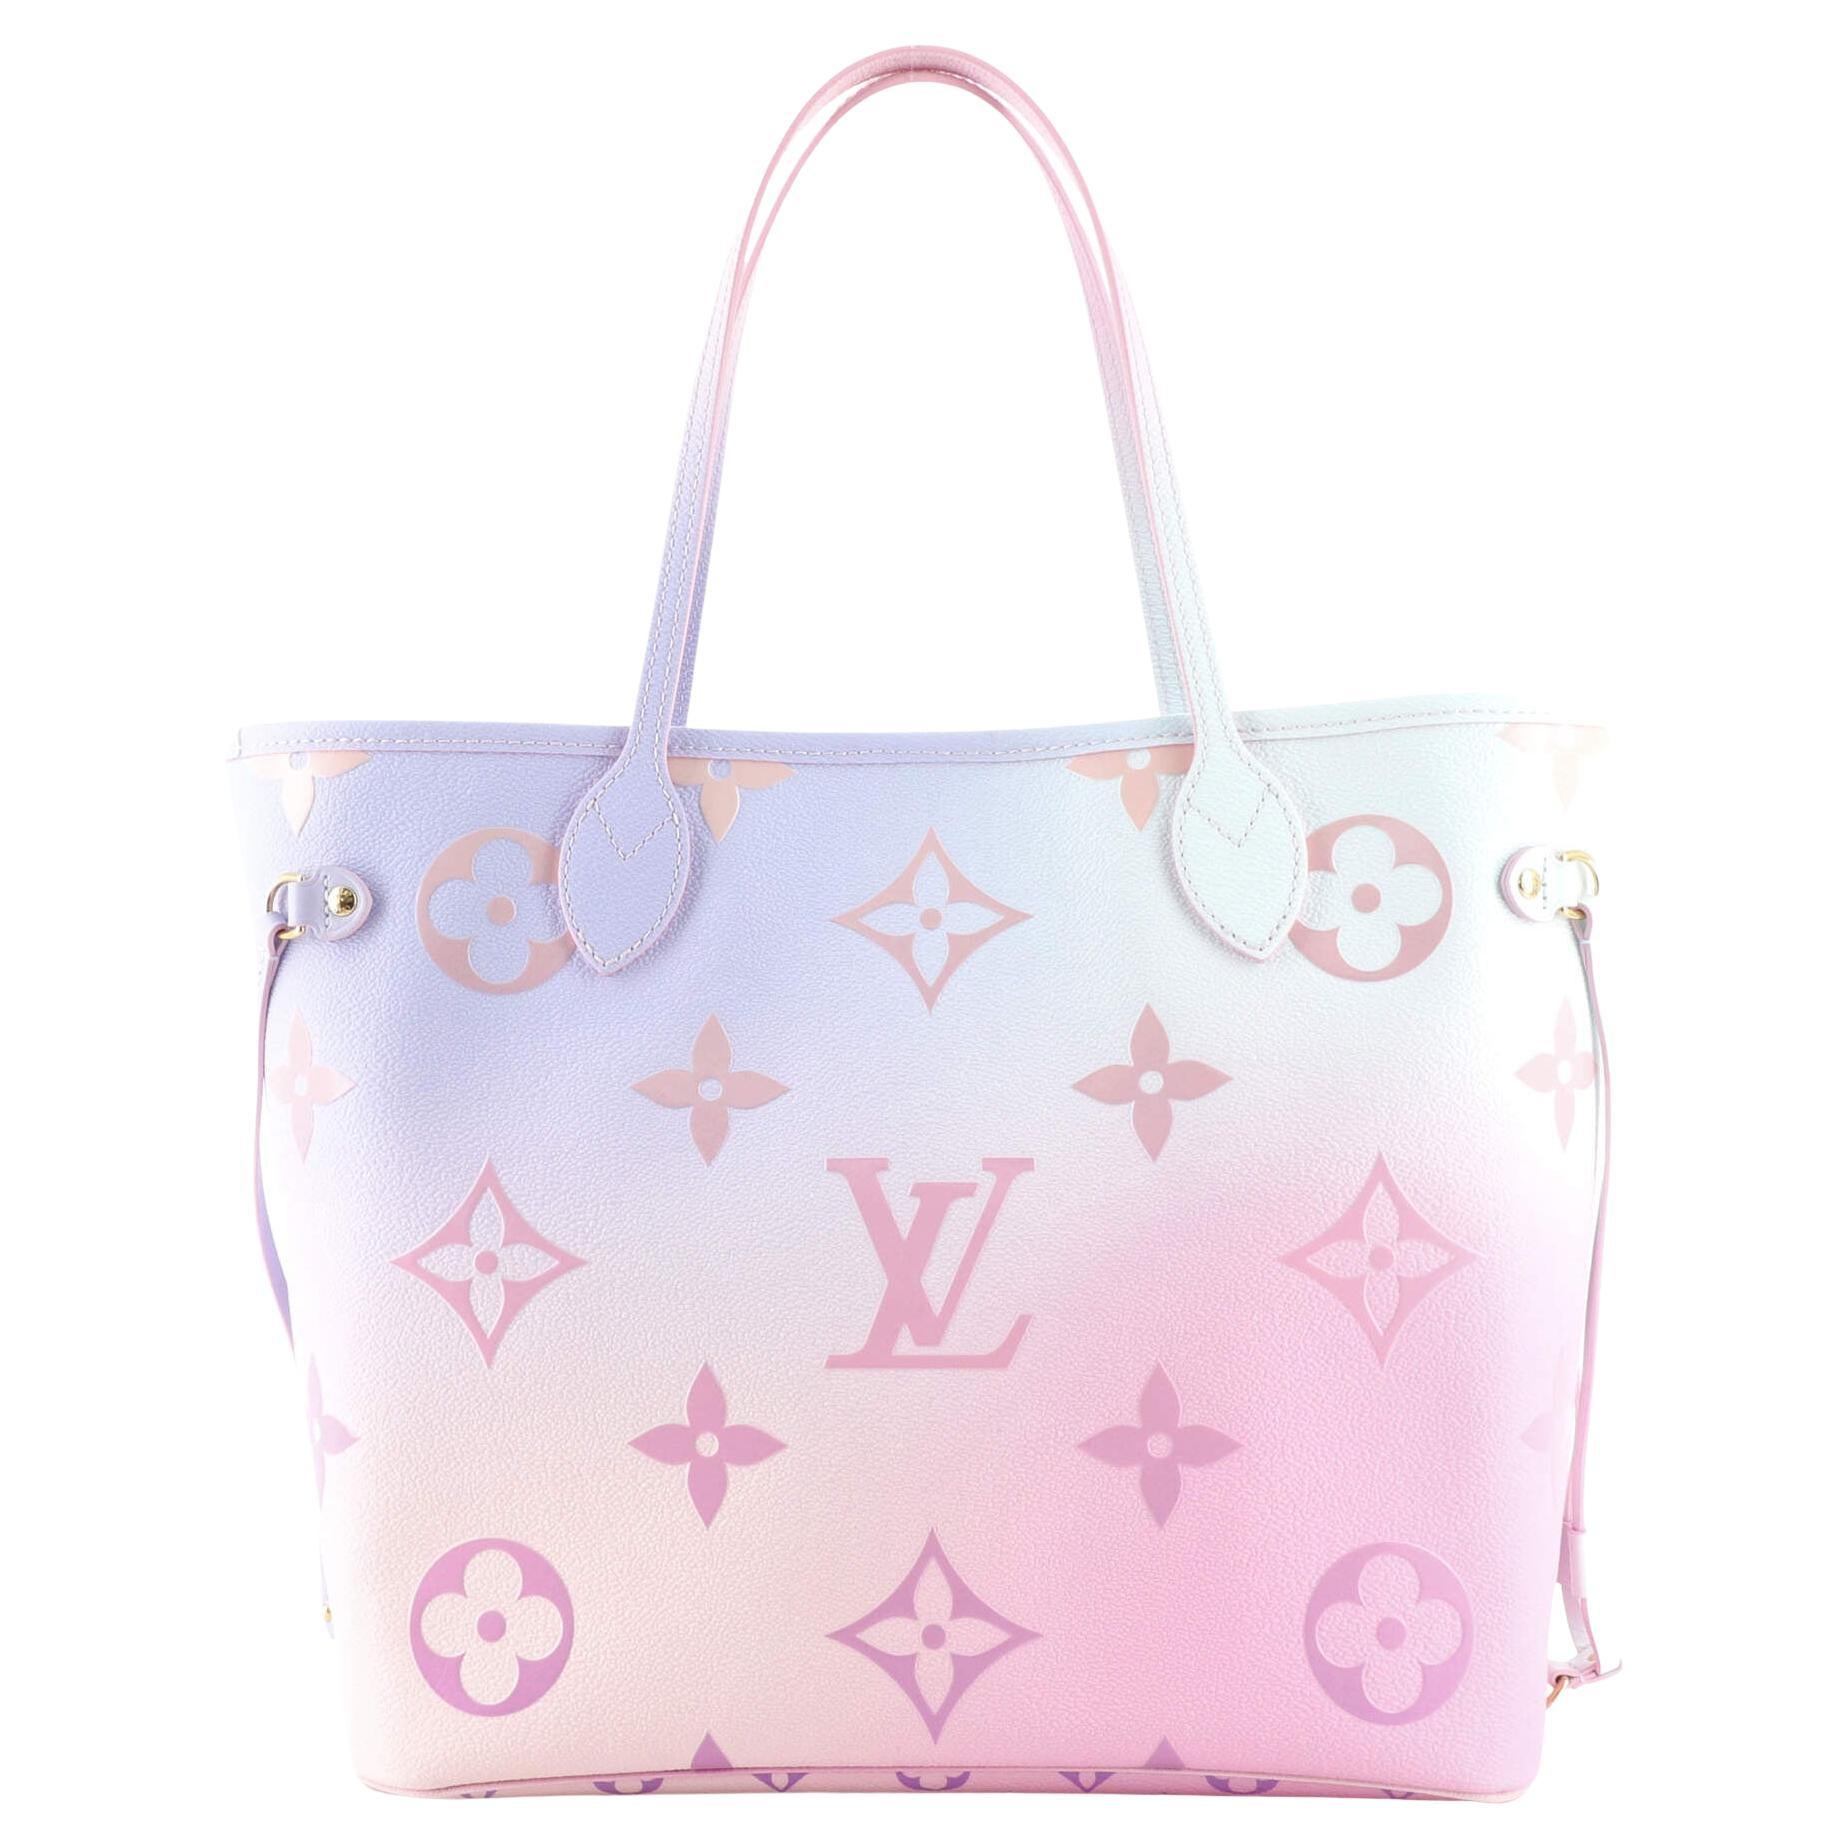 Buy Louis Vuitton LV Escale Neverfull MM Bleu Limited Edition Bags